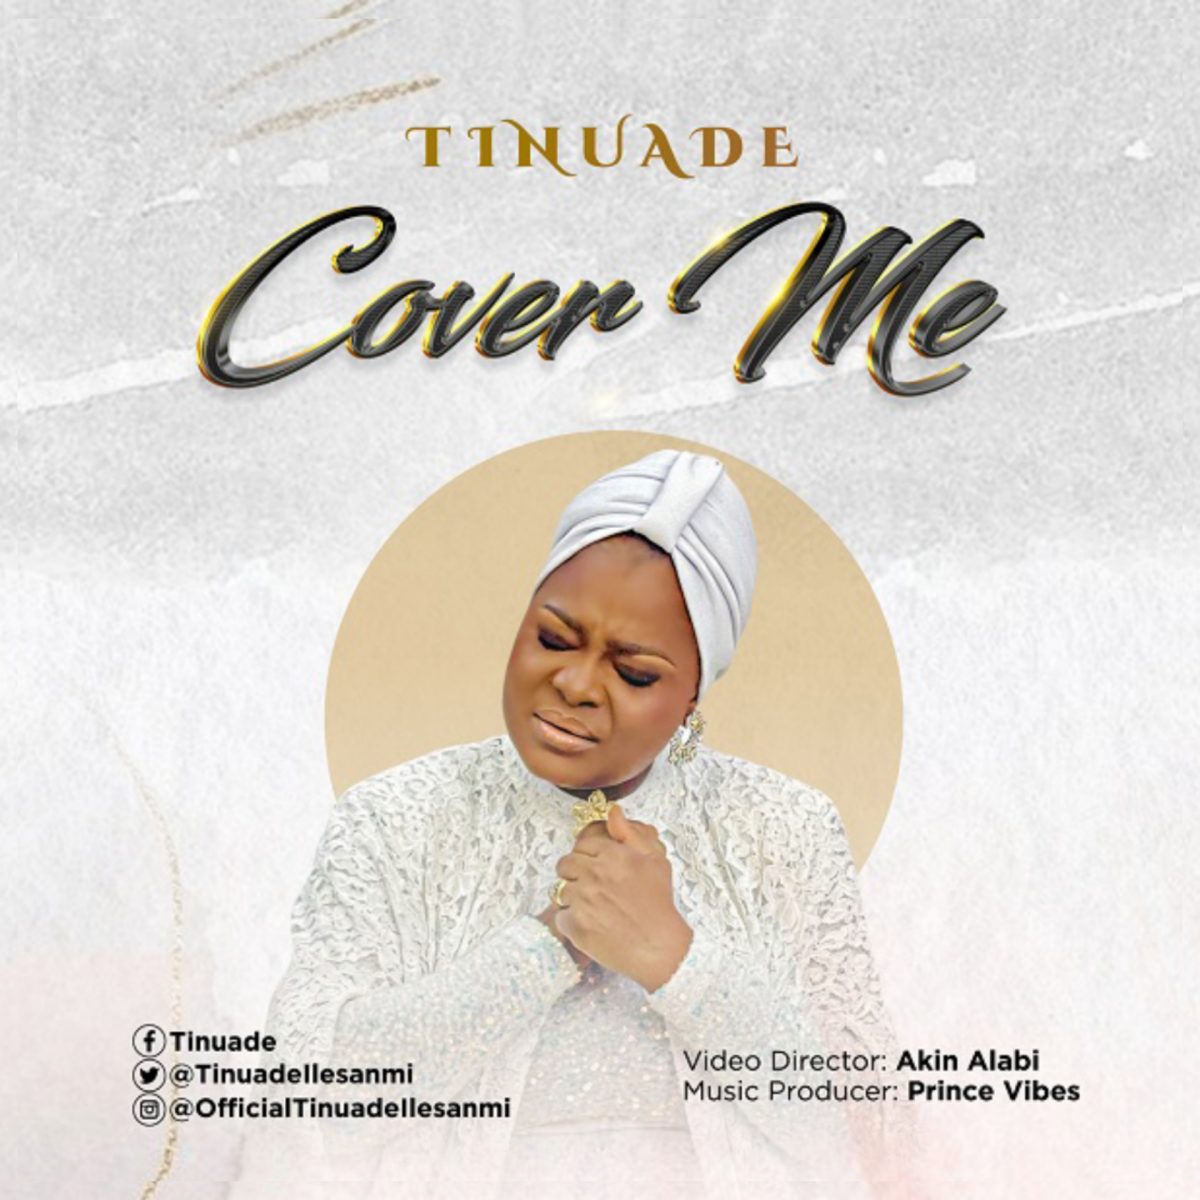 Cover Me By Tinuade